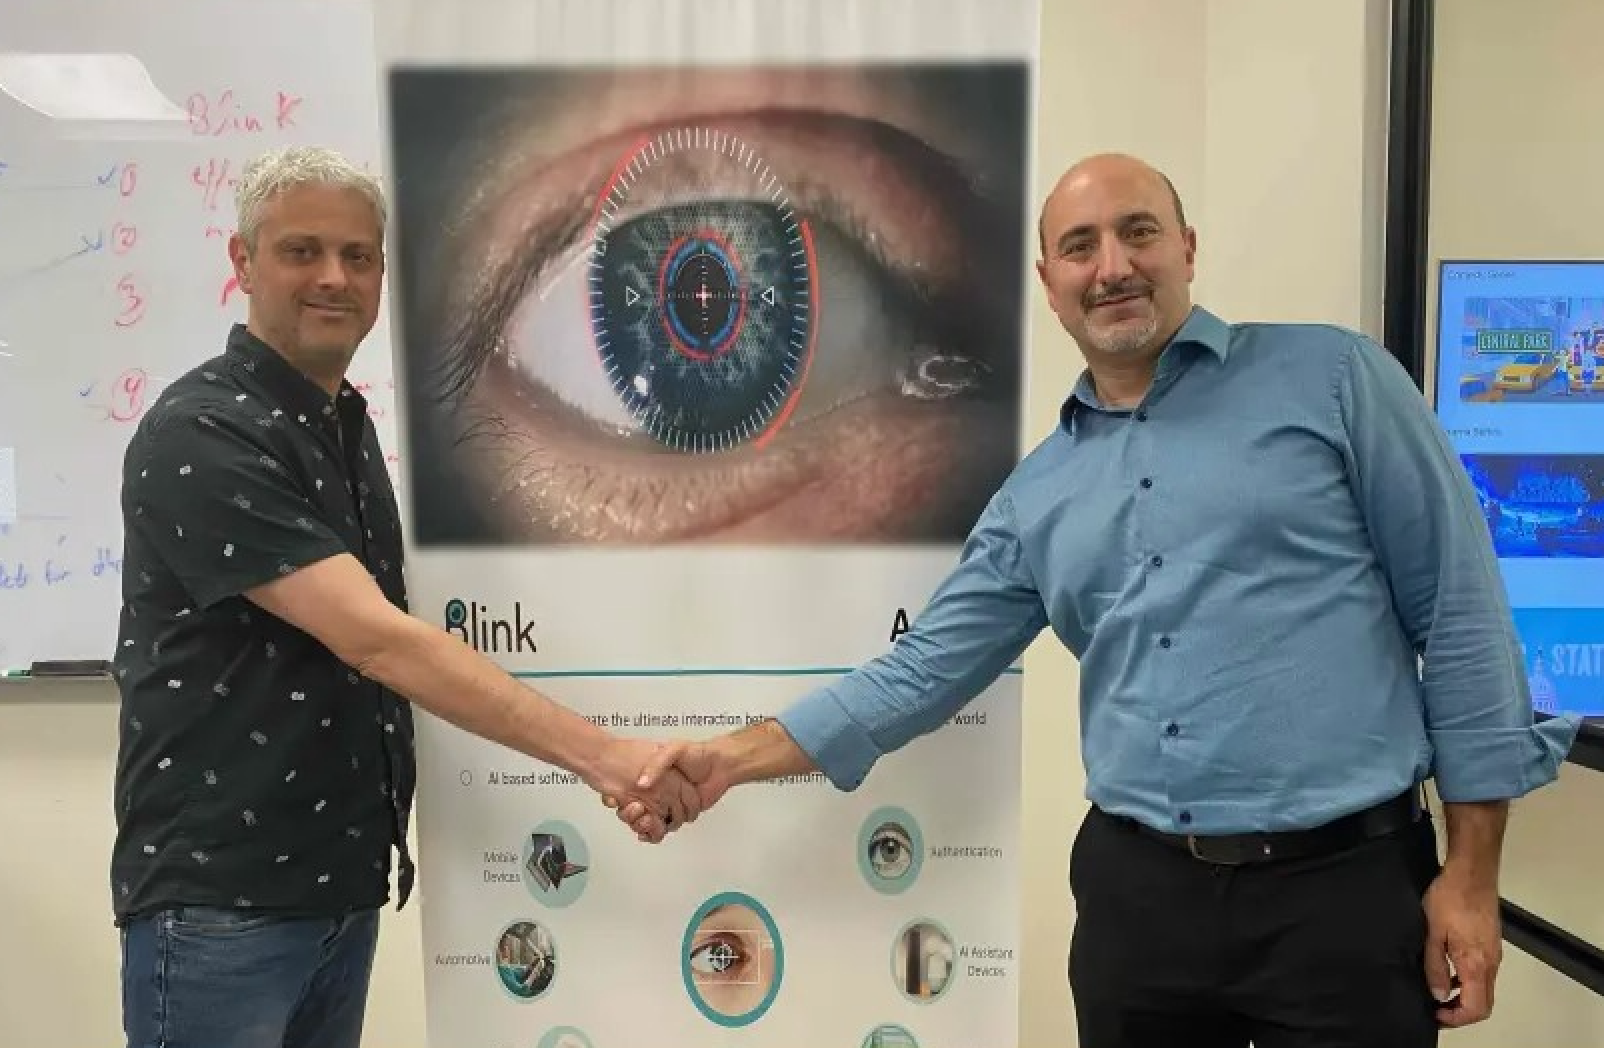 Blink CEO Oren Yogev (left) shakes hands with Yagen Moshe (right), CEO and president of Shamir Optical.